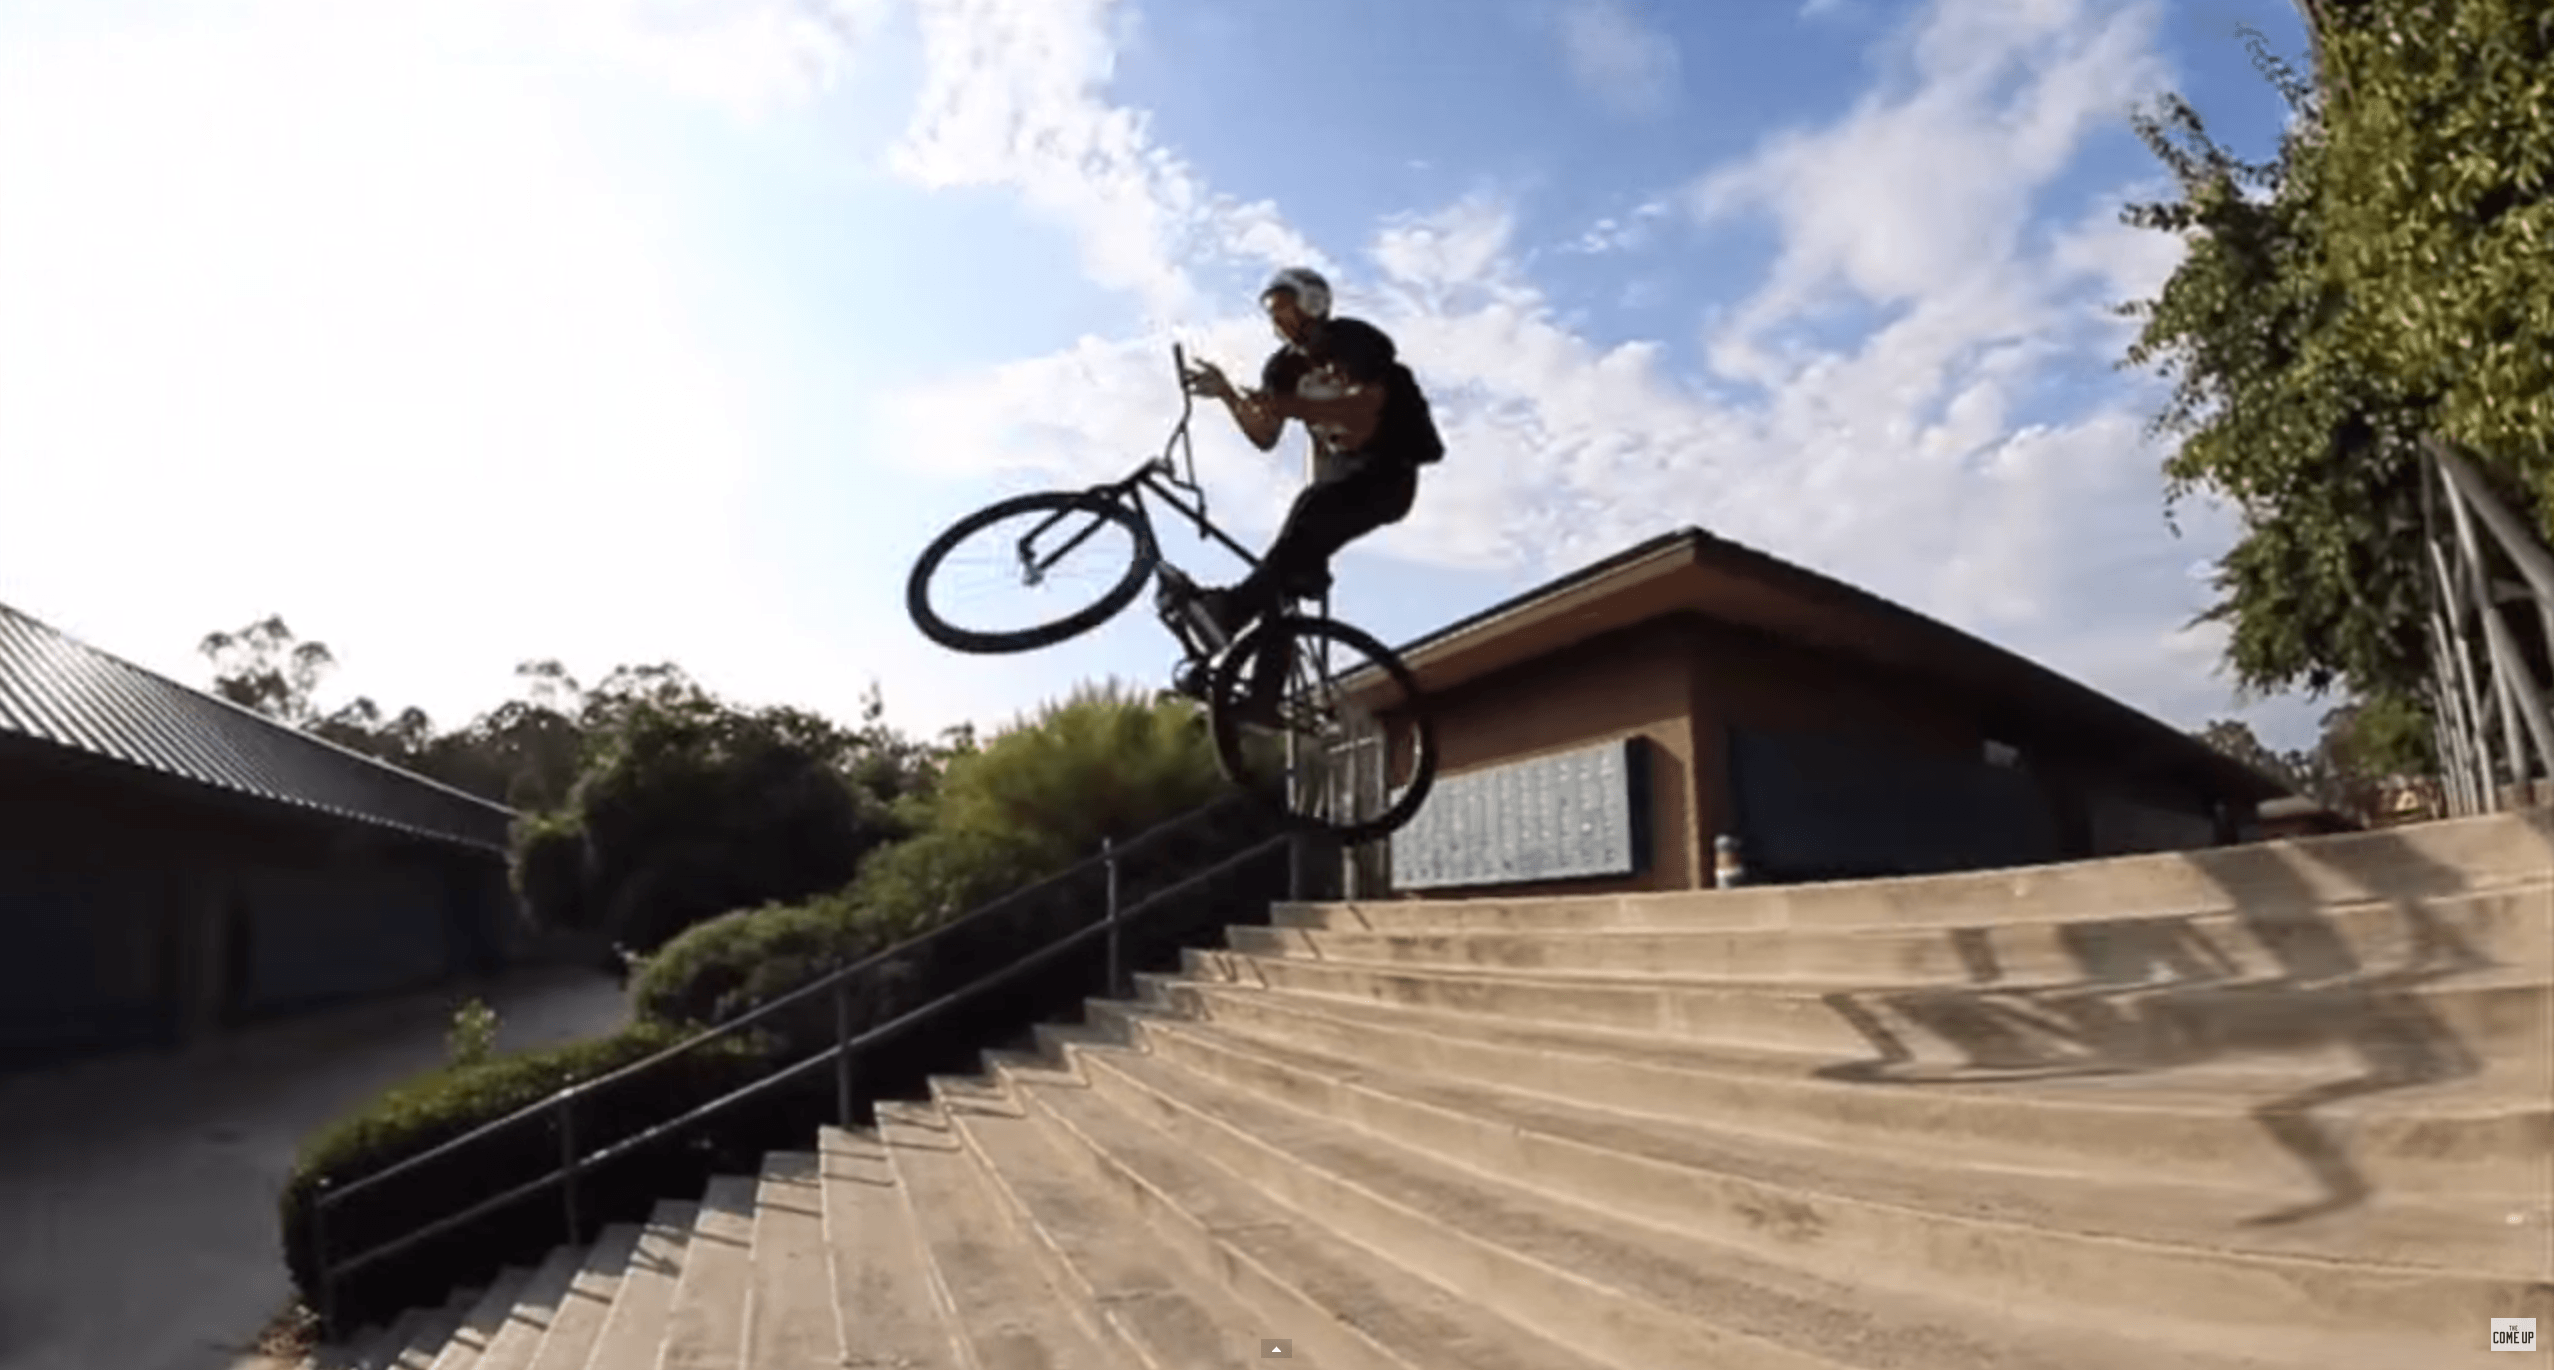 Guy tries to Barspin a 20 set on a Fixie